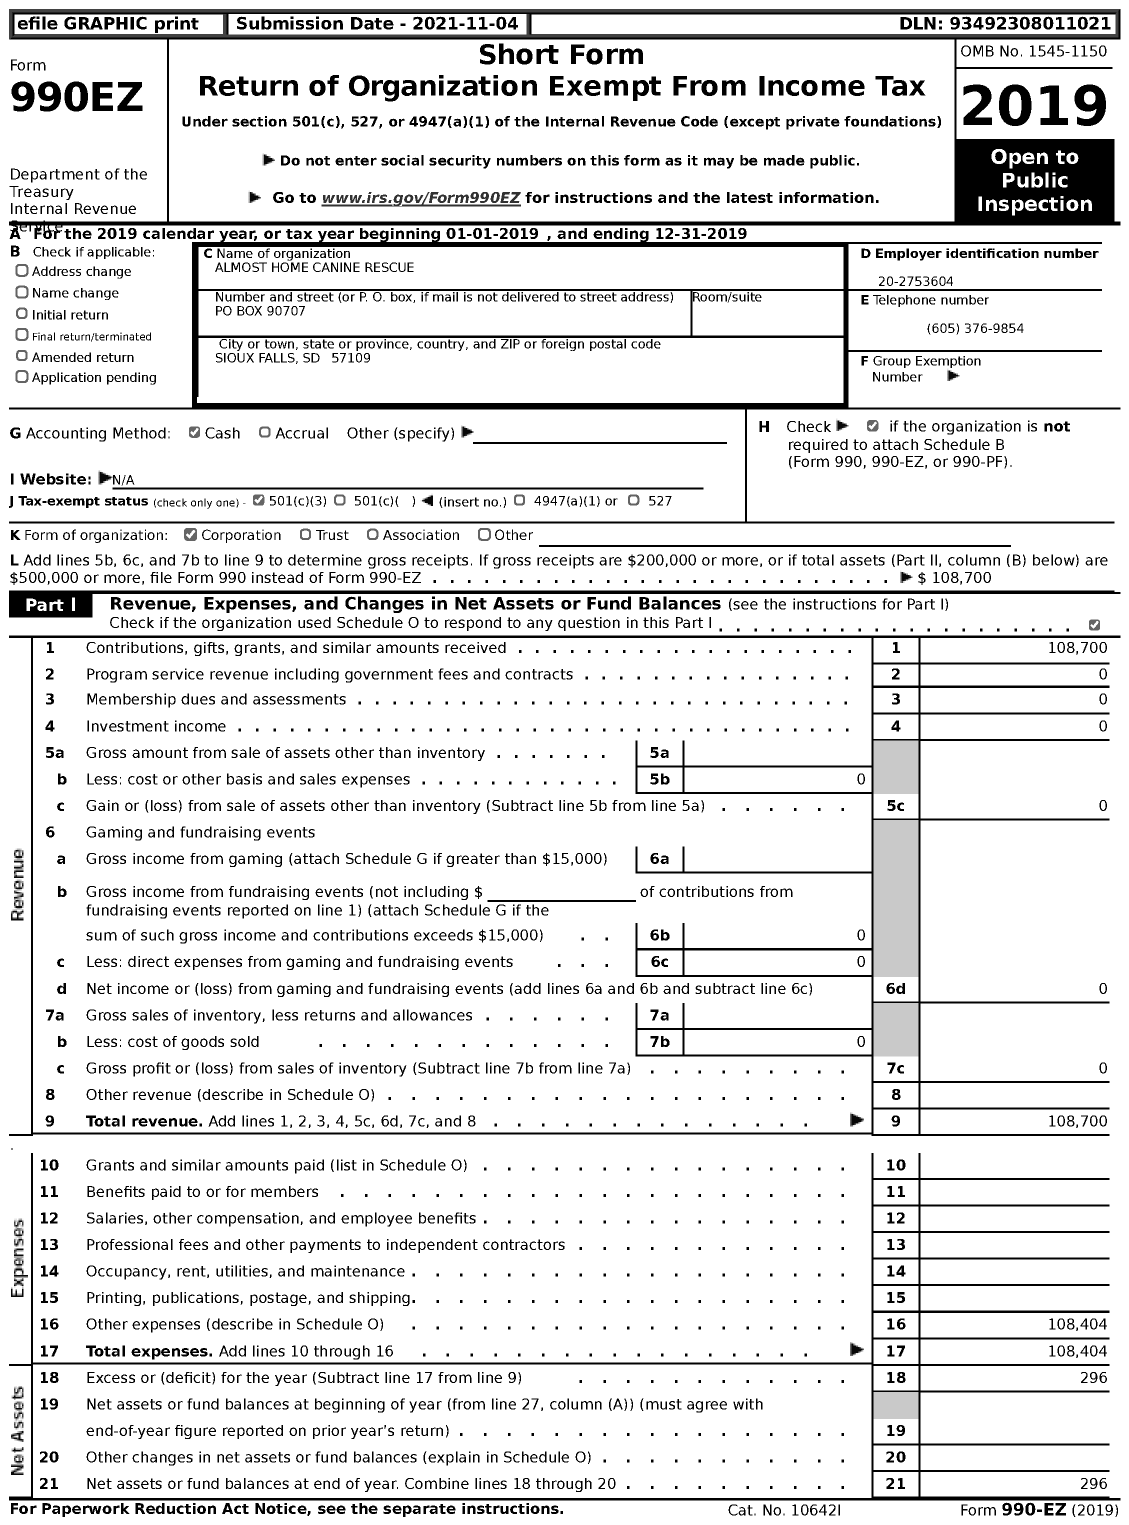 Image of first page of 2019 Form 990EZ for Almost Home Canine Rescue (AHCR)